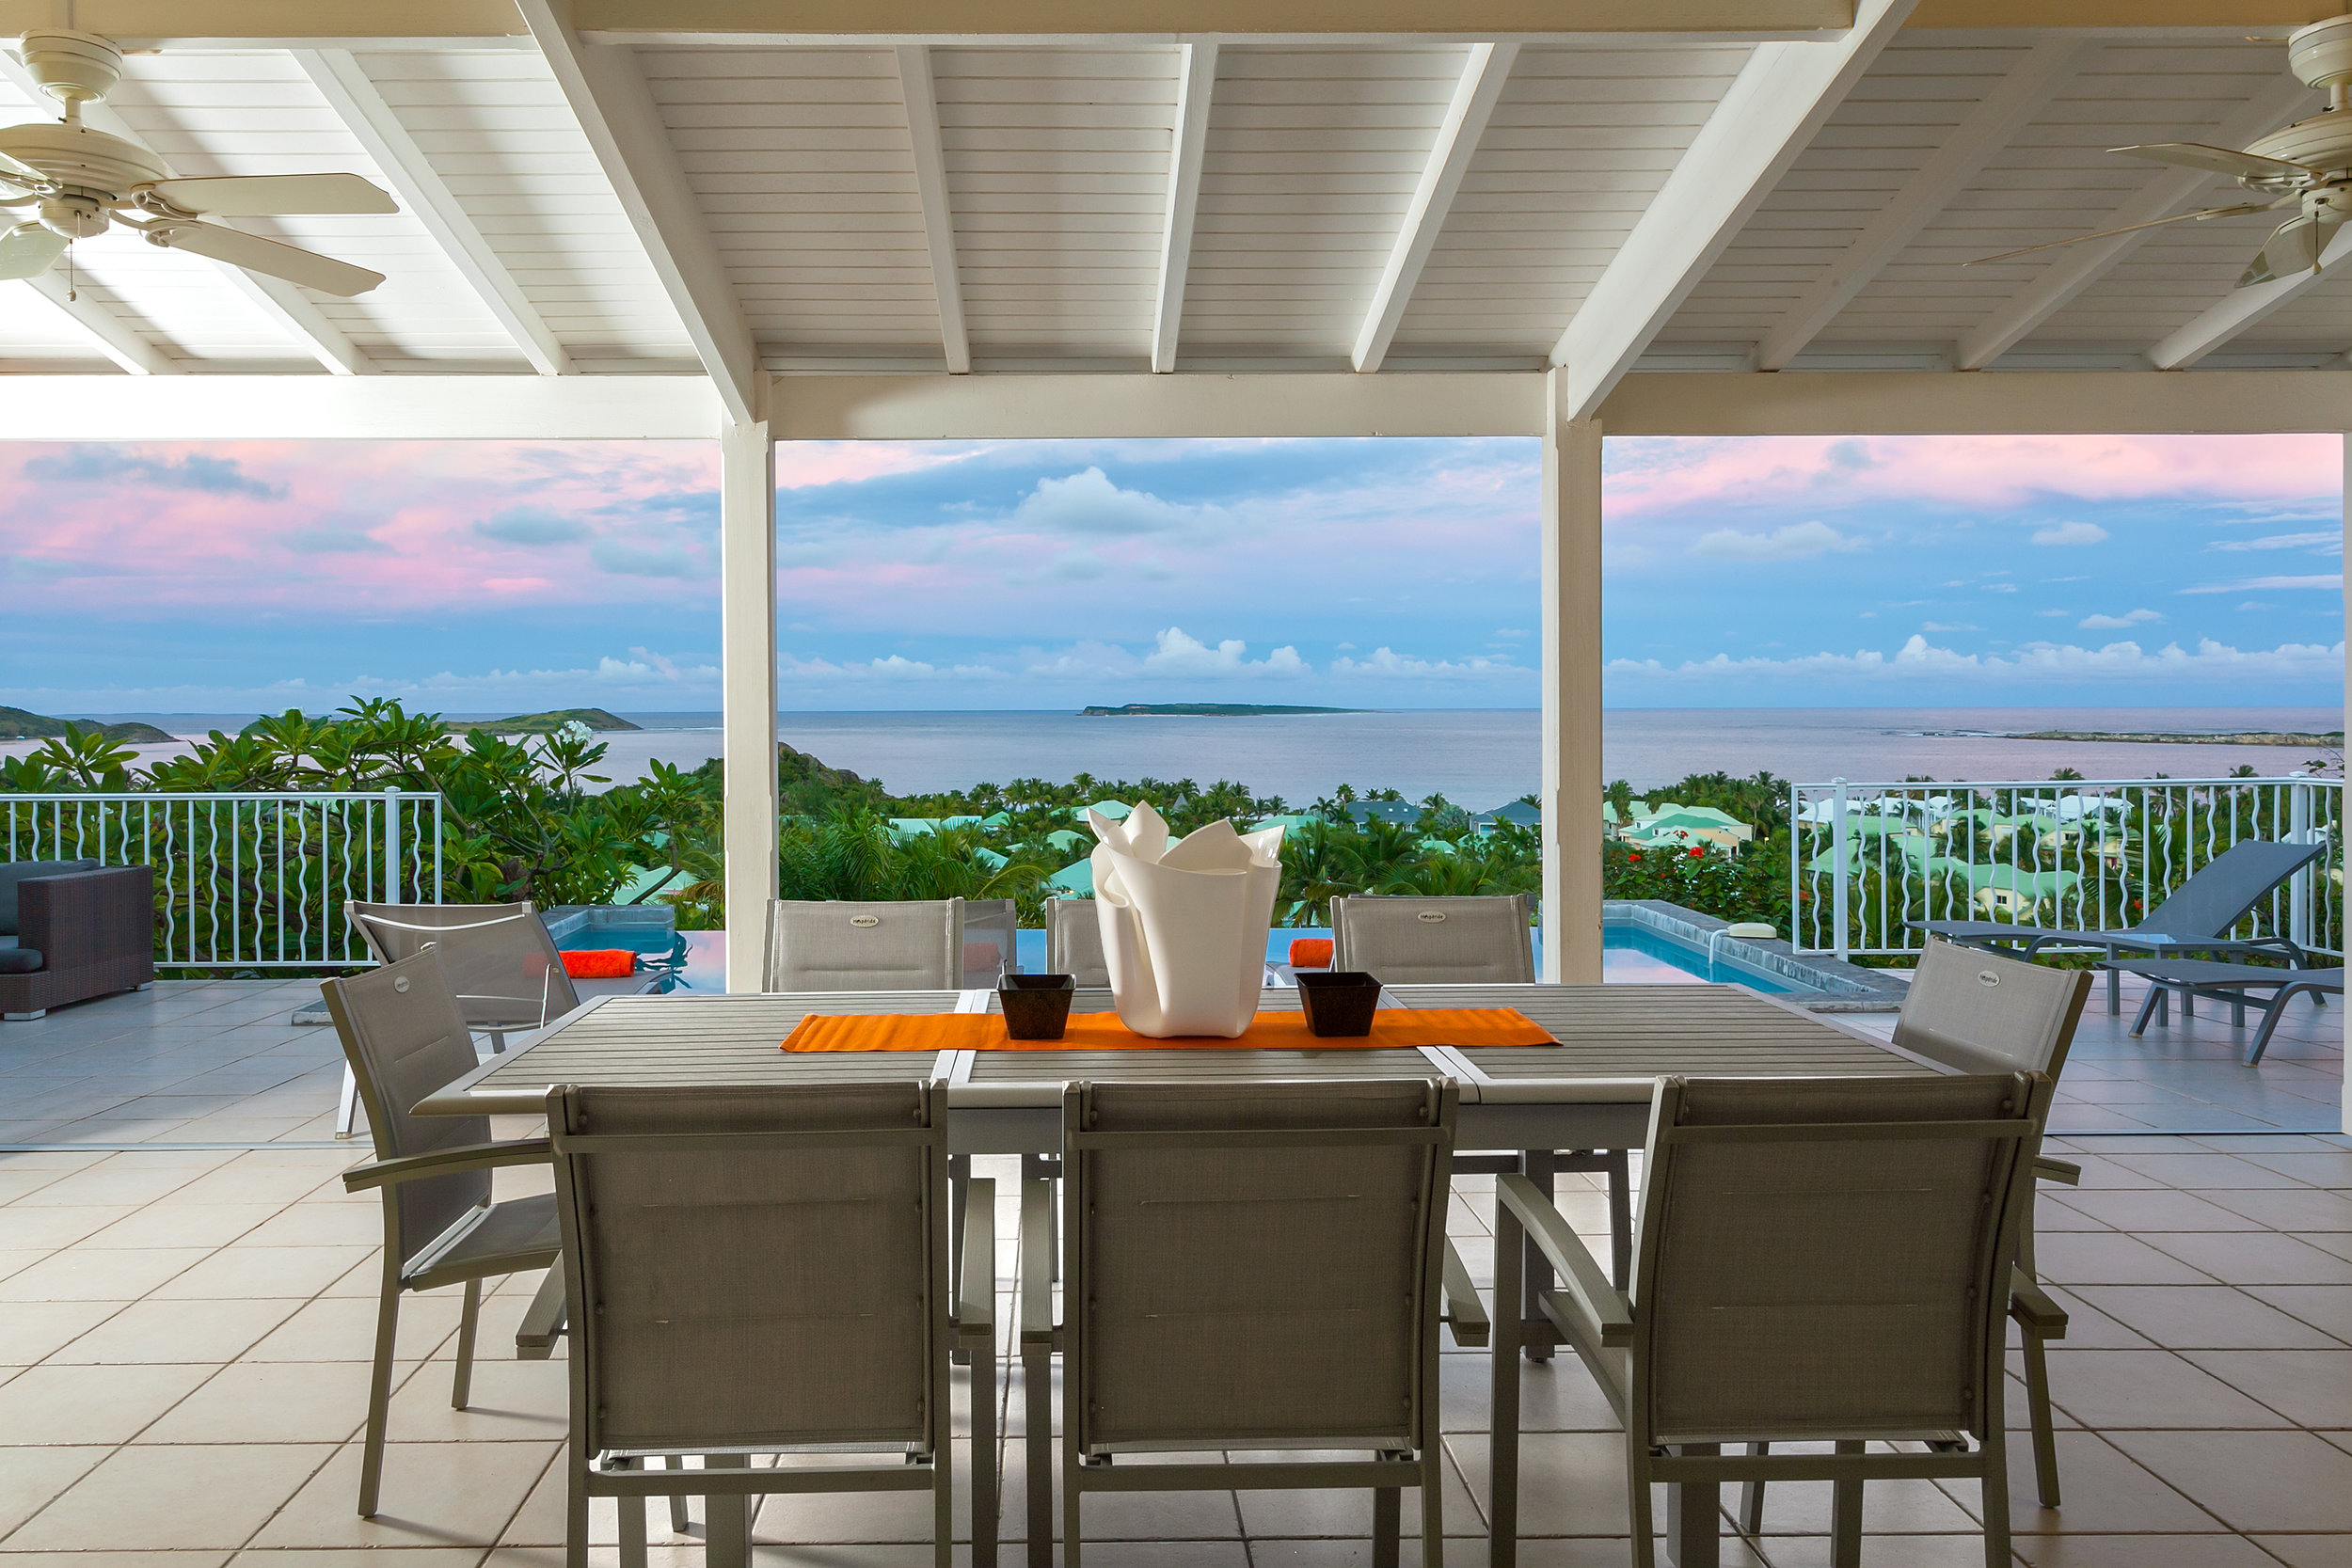 Covered outdoor dining area with sea view.jpg